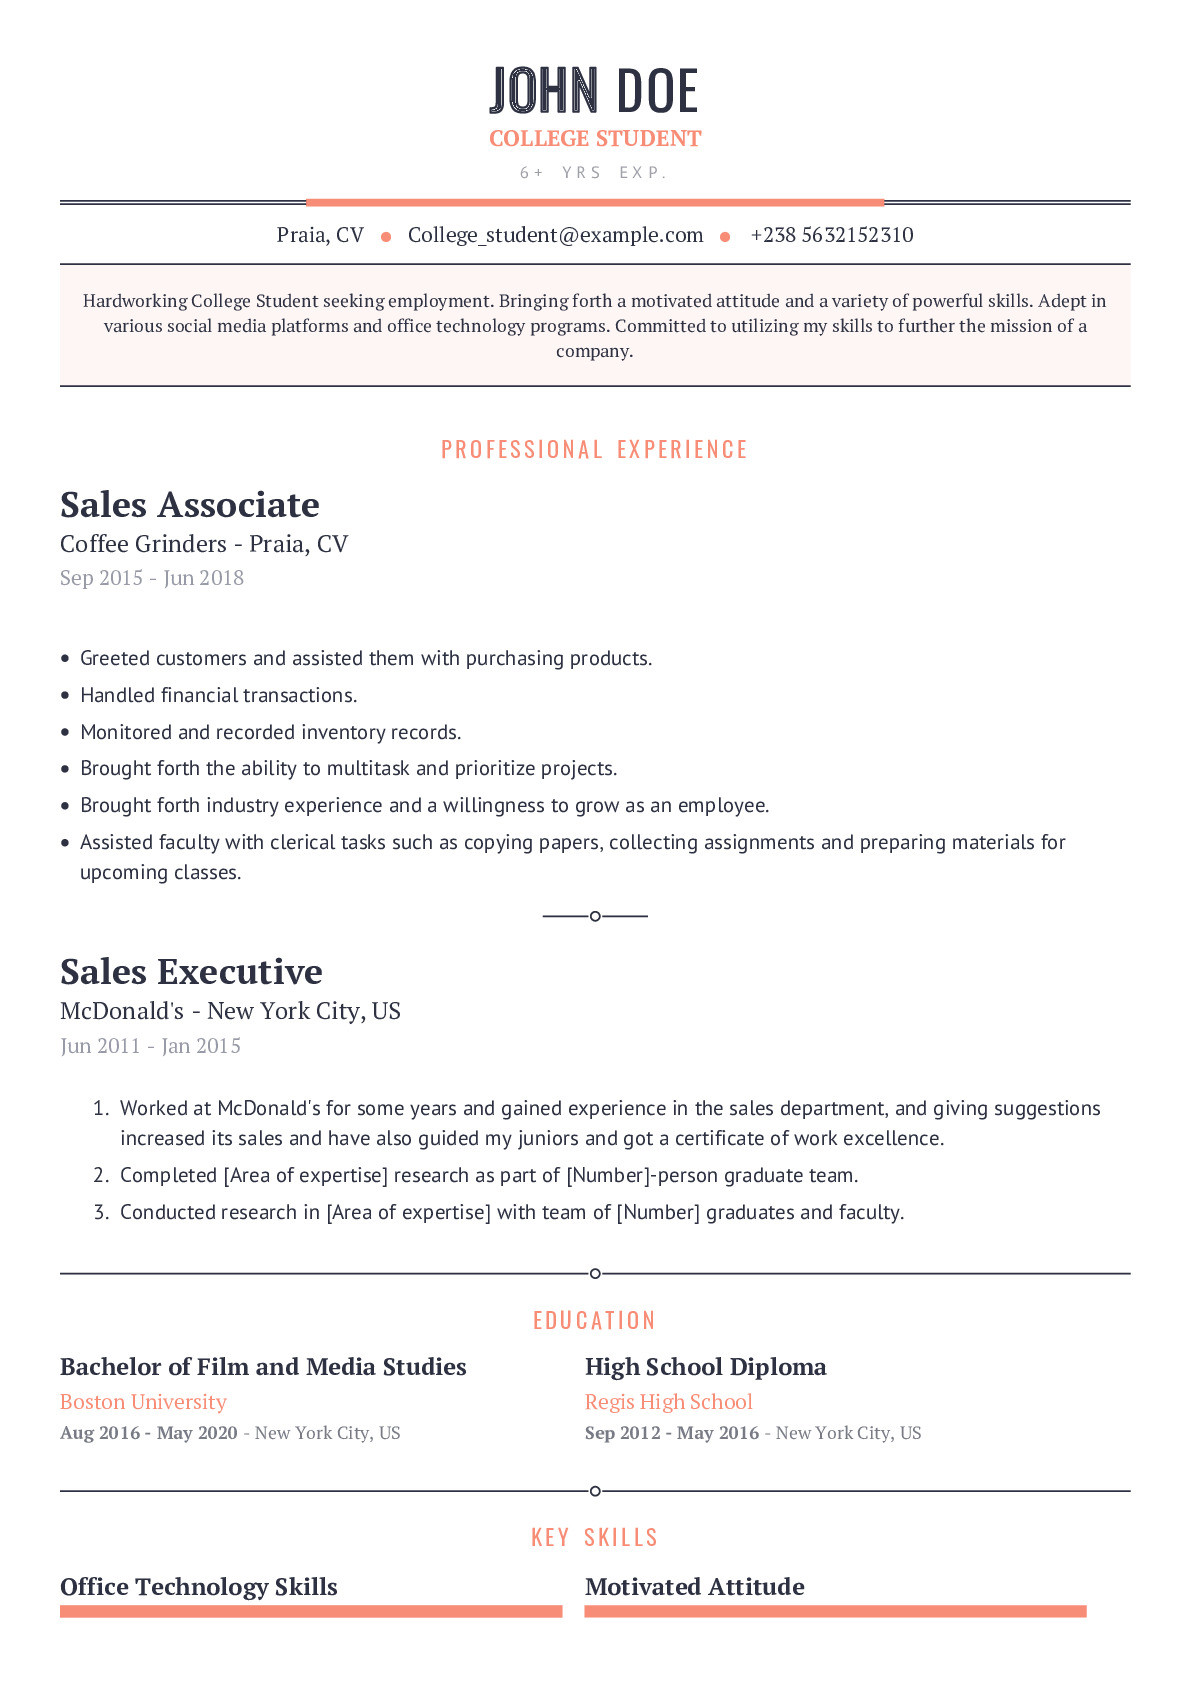 Resume Sample for College Students Still In College College Student Resume Example with Content Sample Craftmycv